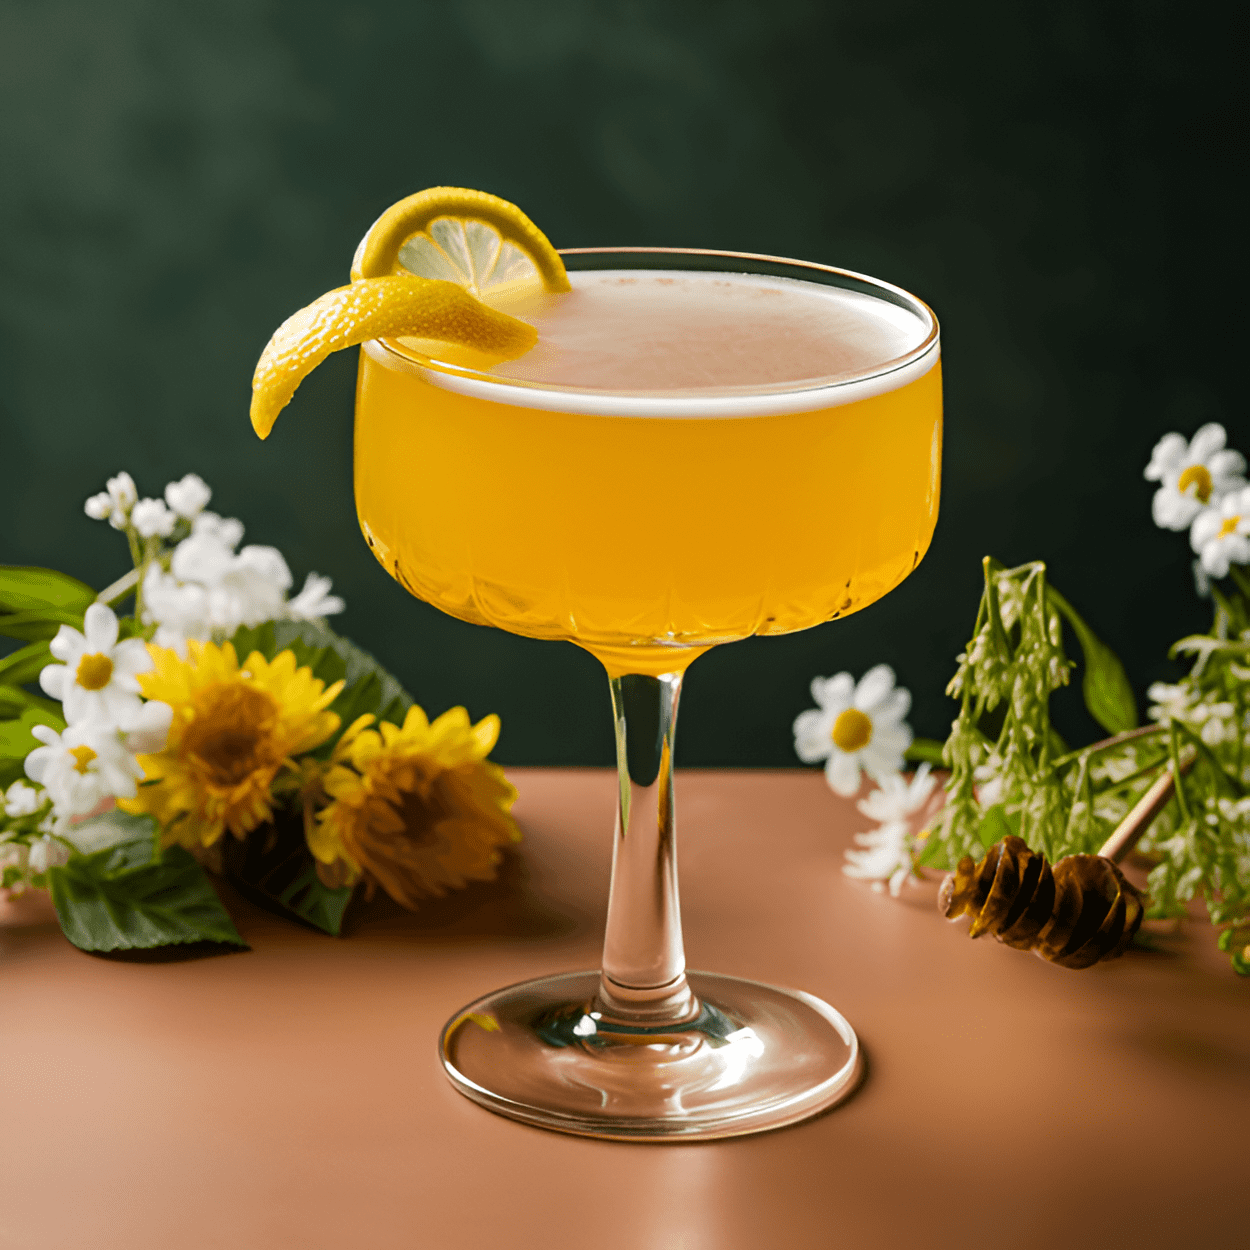 The Honey Bee cocktail offers a delightful balance of sweet, sour, and floral flavors. The honey lends a rich, velvety sweetness, while the lemon juice provides a bright, tangy contrast. The rum adds warmth and depth, making this cocktail both refreshing and satisfying.